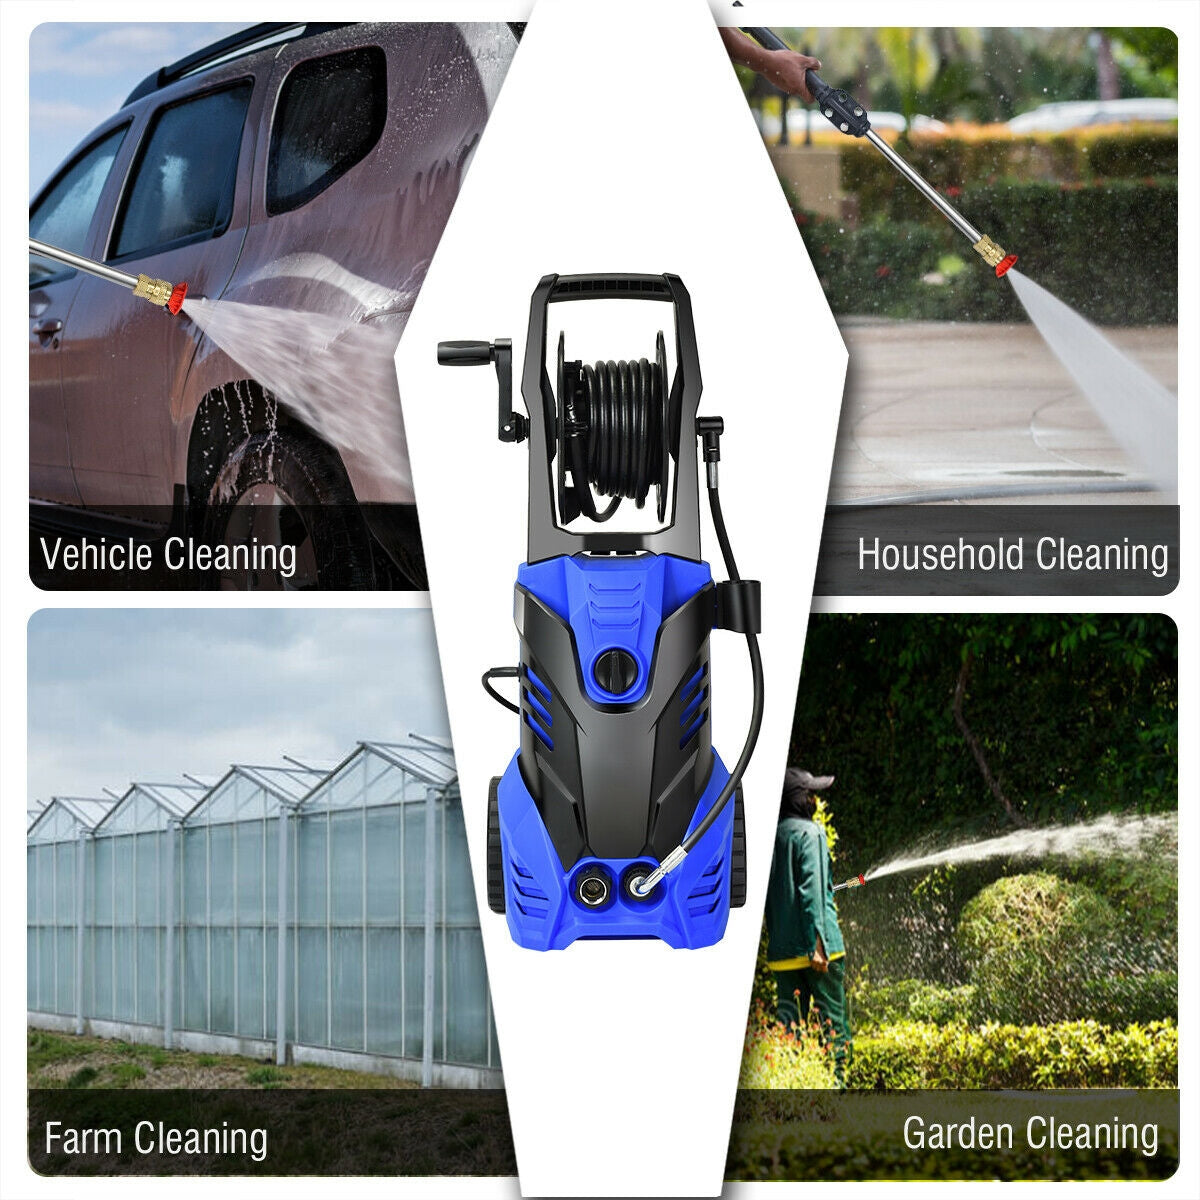 Multipurpose Cleaning: Our pressure washer is designed for a range of applications, from vehicles and home exteriors to boats, driveways, and decks. The versatile gun stock connects to various accessories, making it a comprehensive solution for all your cleaning needs.